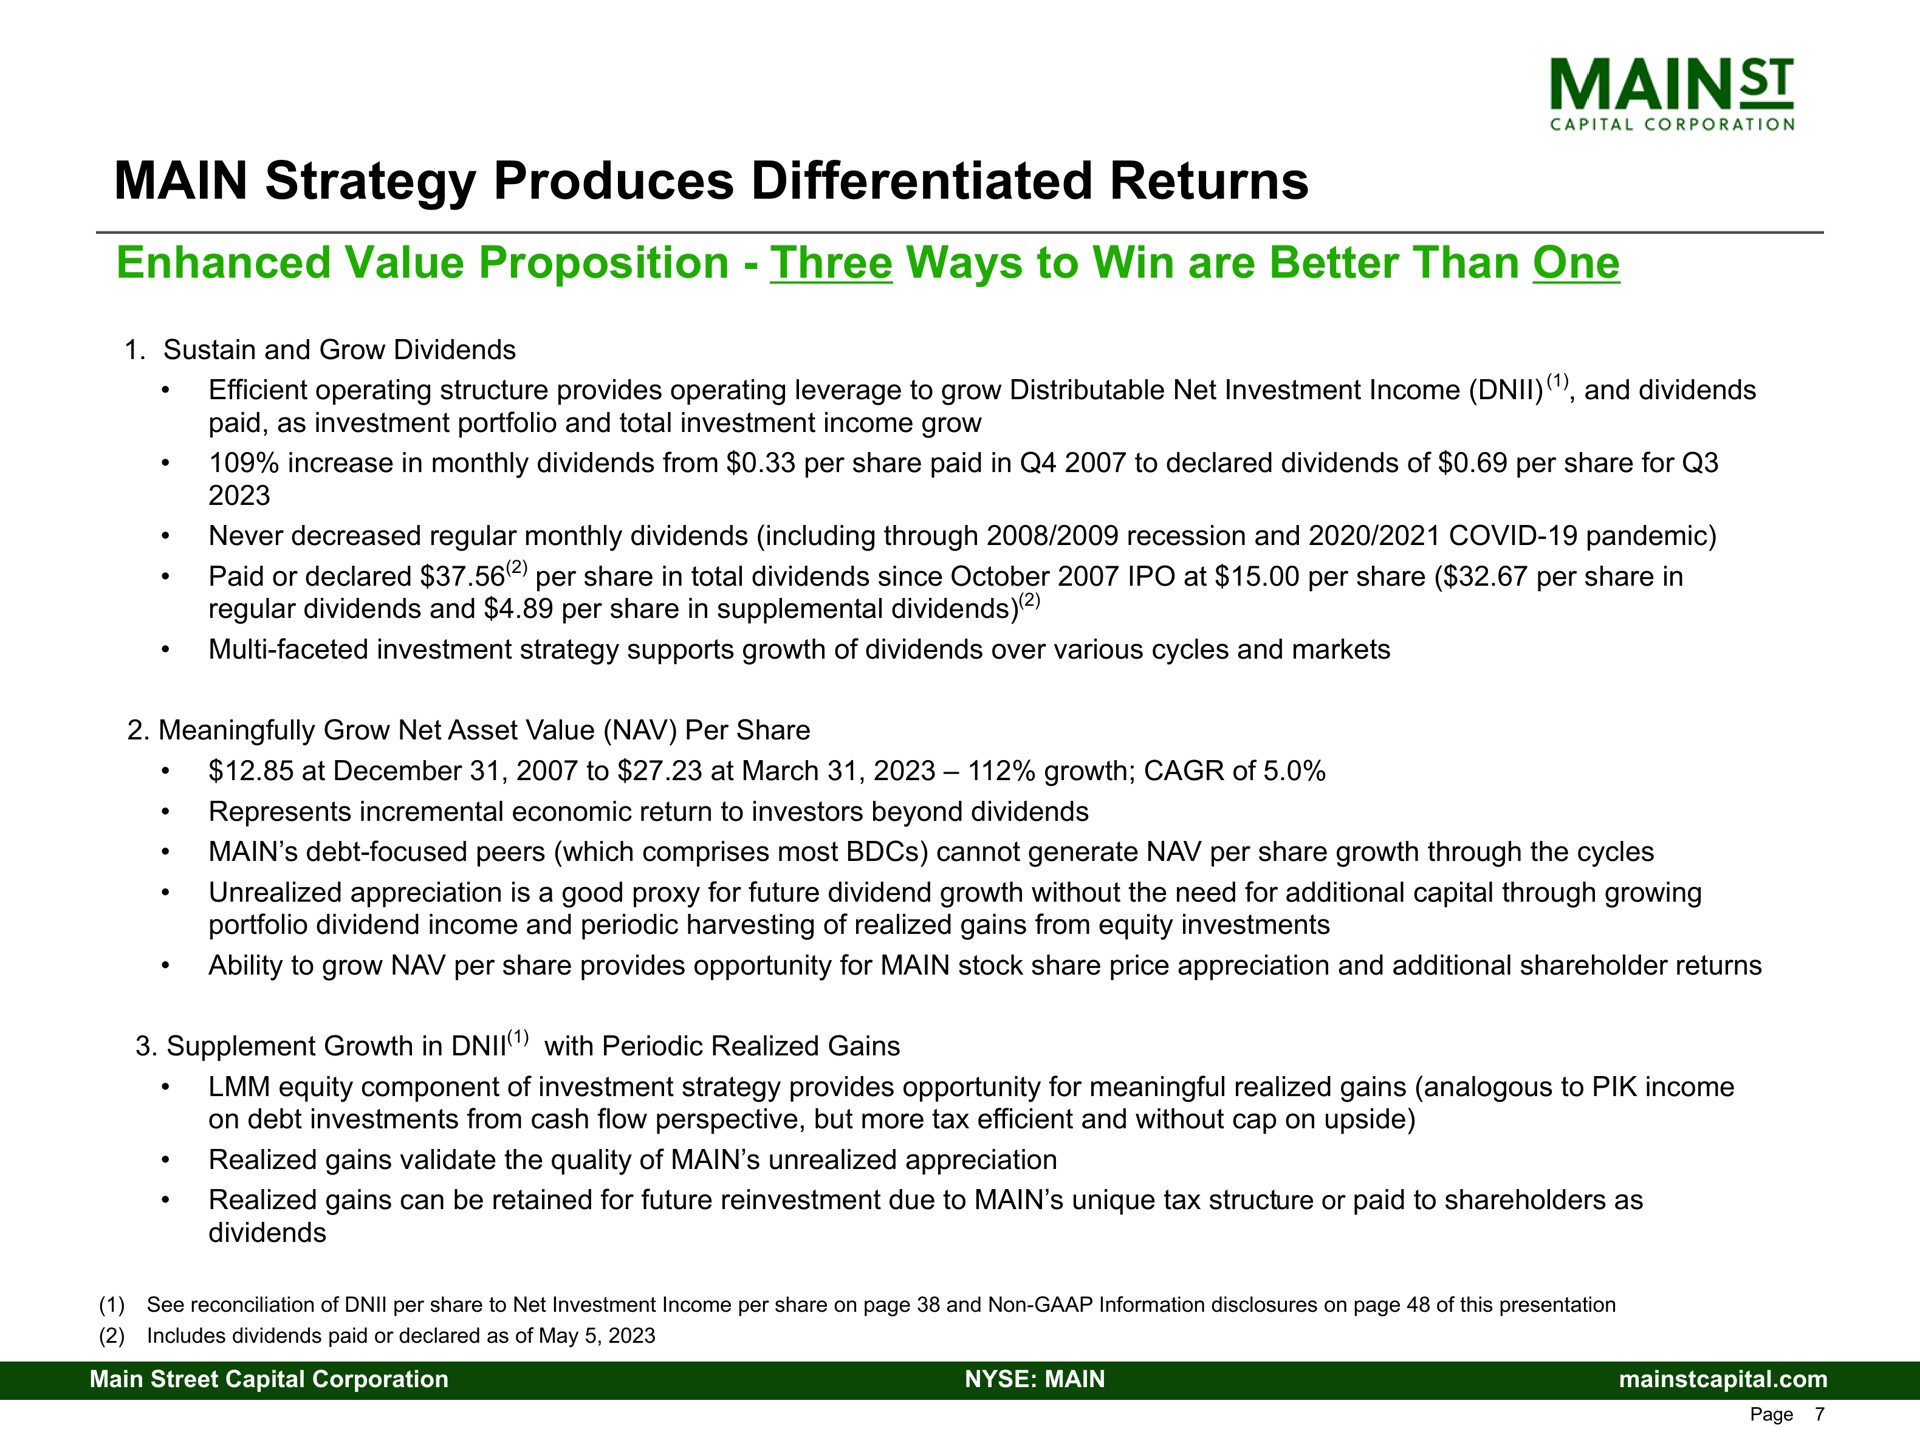 main strategy produces differentiated returns enhanced value proposition three ways to win are better than one mains | Main Street Capital